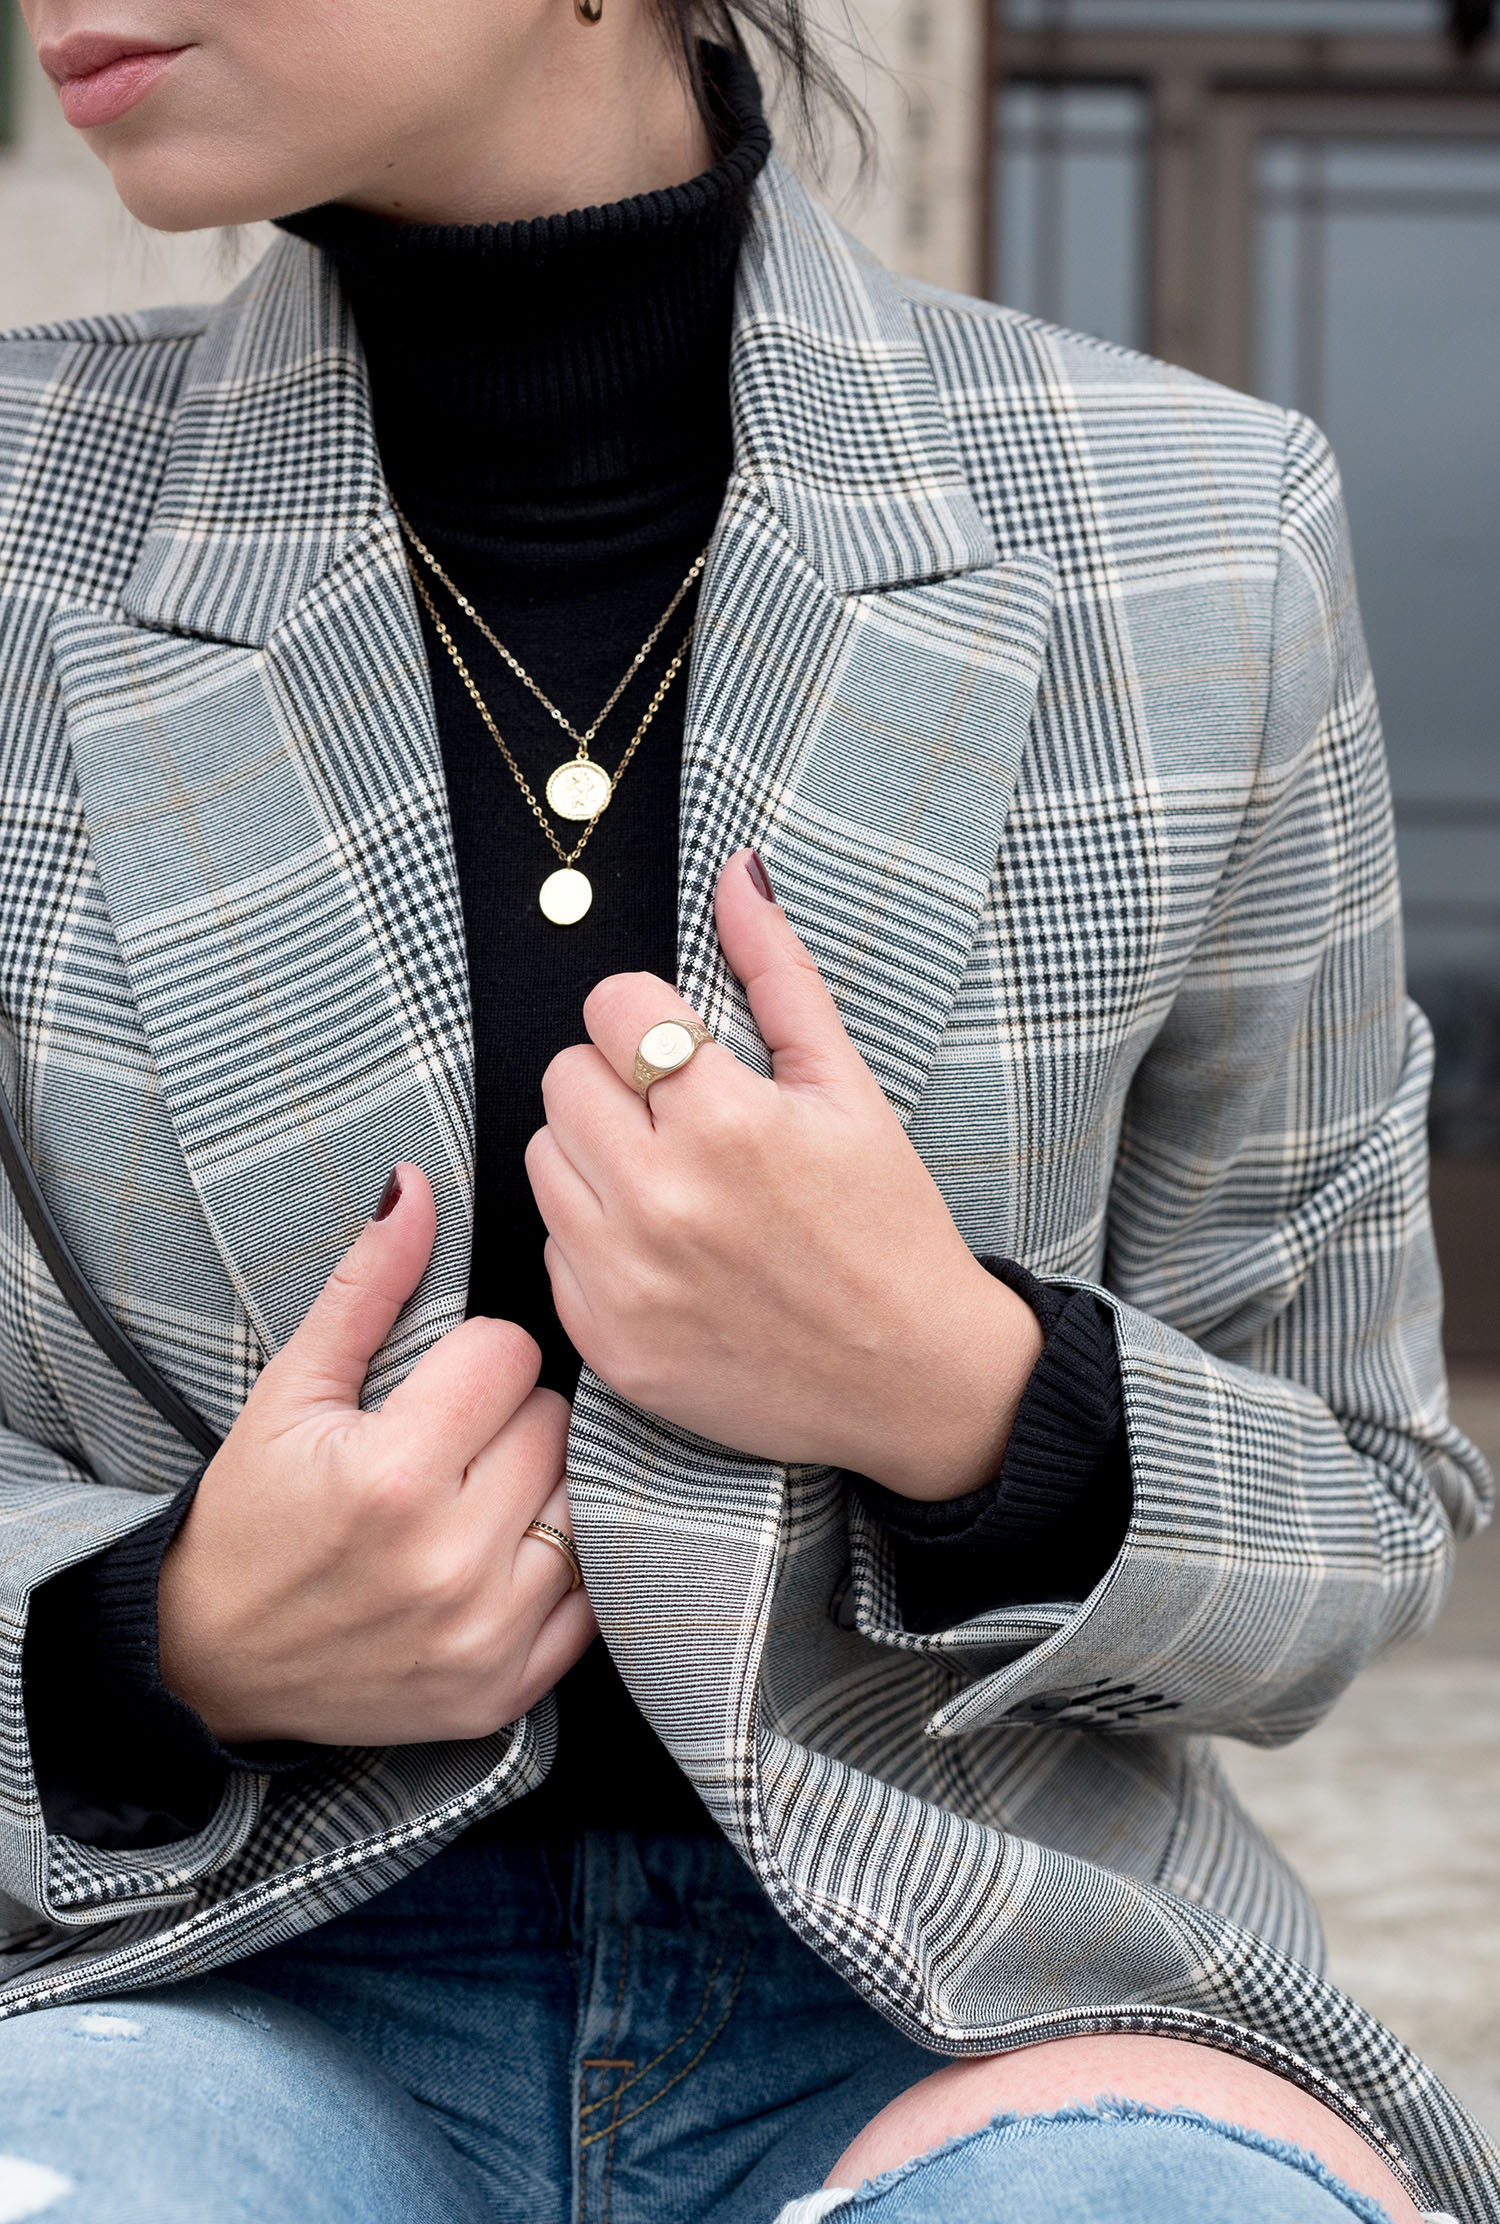 Outfit details on top Canadian fashion blogger Cee Fardoe of Coco & Vera, including a Wolf Circus Monet necklace and Mango checked blazer